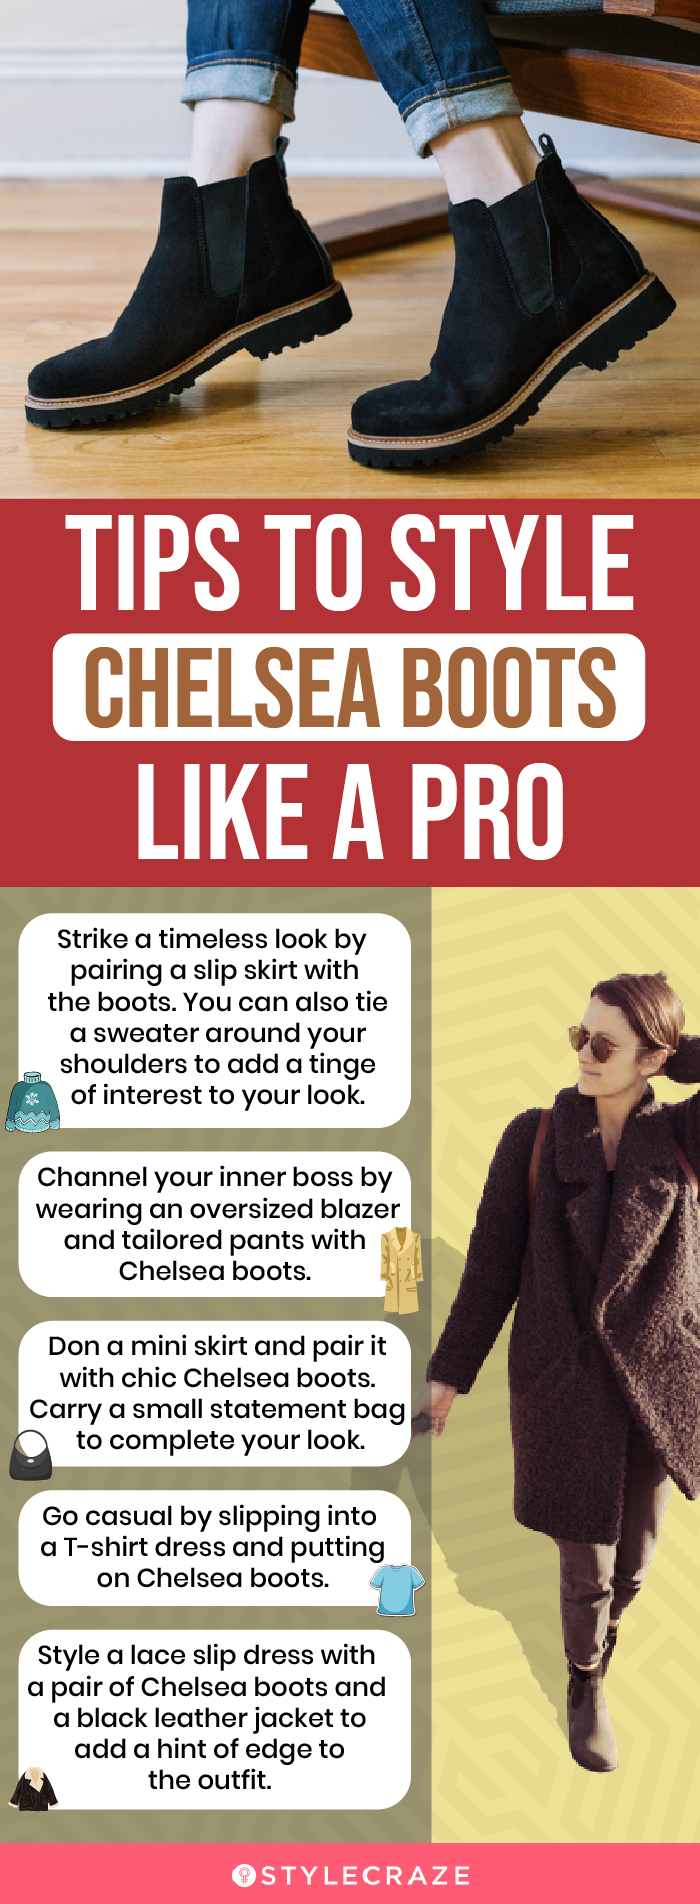 Tips To Style Chelsea Boots Like A Pro (infographic)